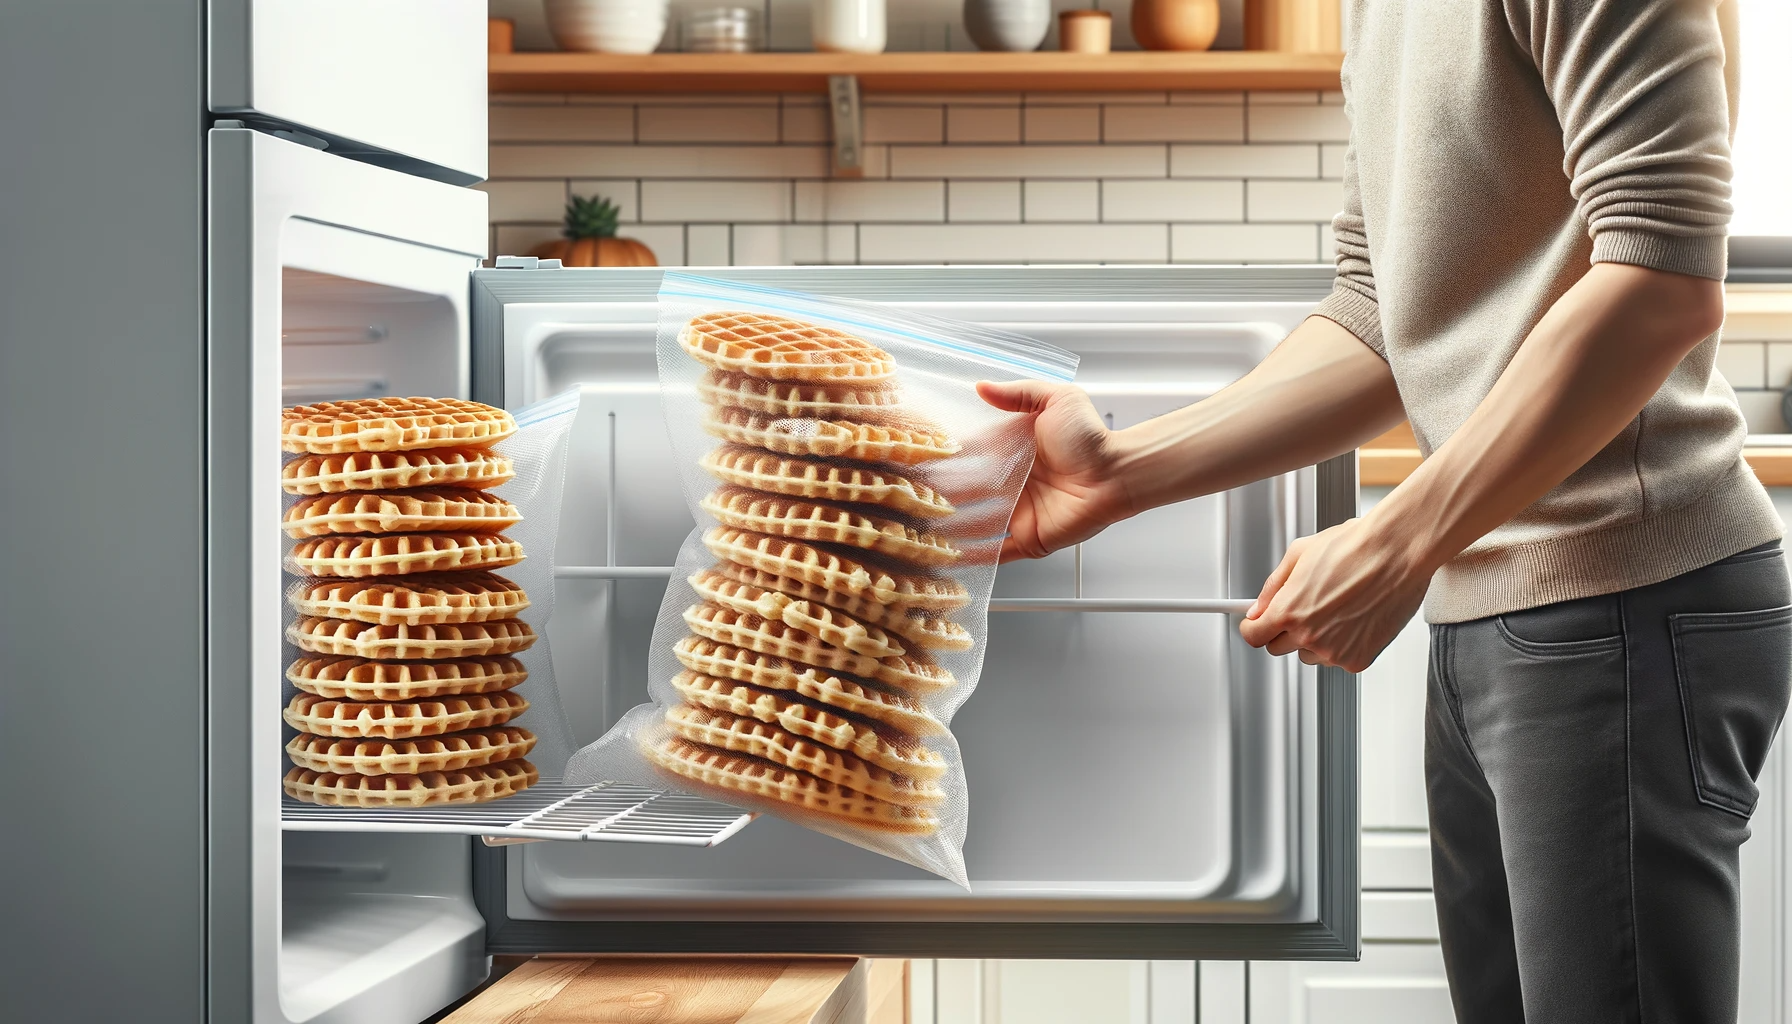 - A home kitchen scene depicting the process of freezing chaffles. The image shows a person placing a stack of chaffles, wrapped in clear freezer-safe